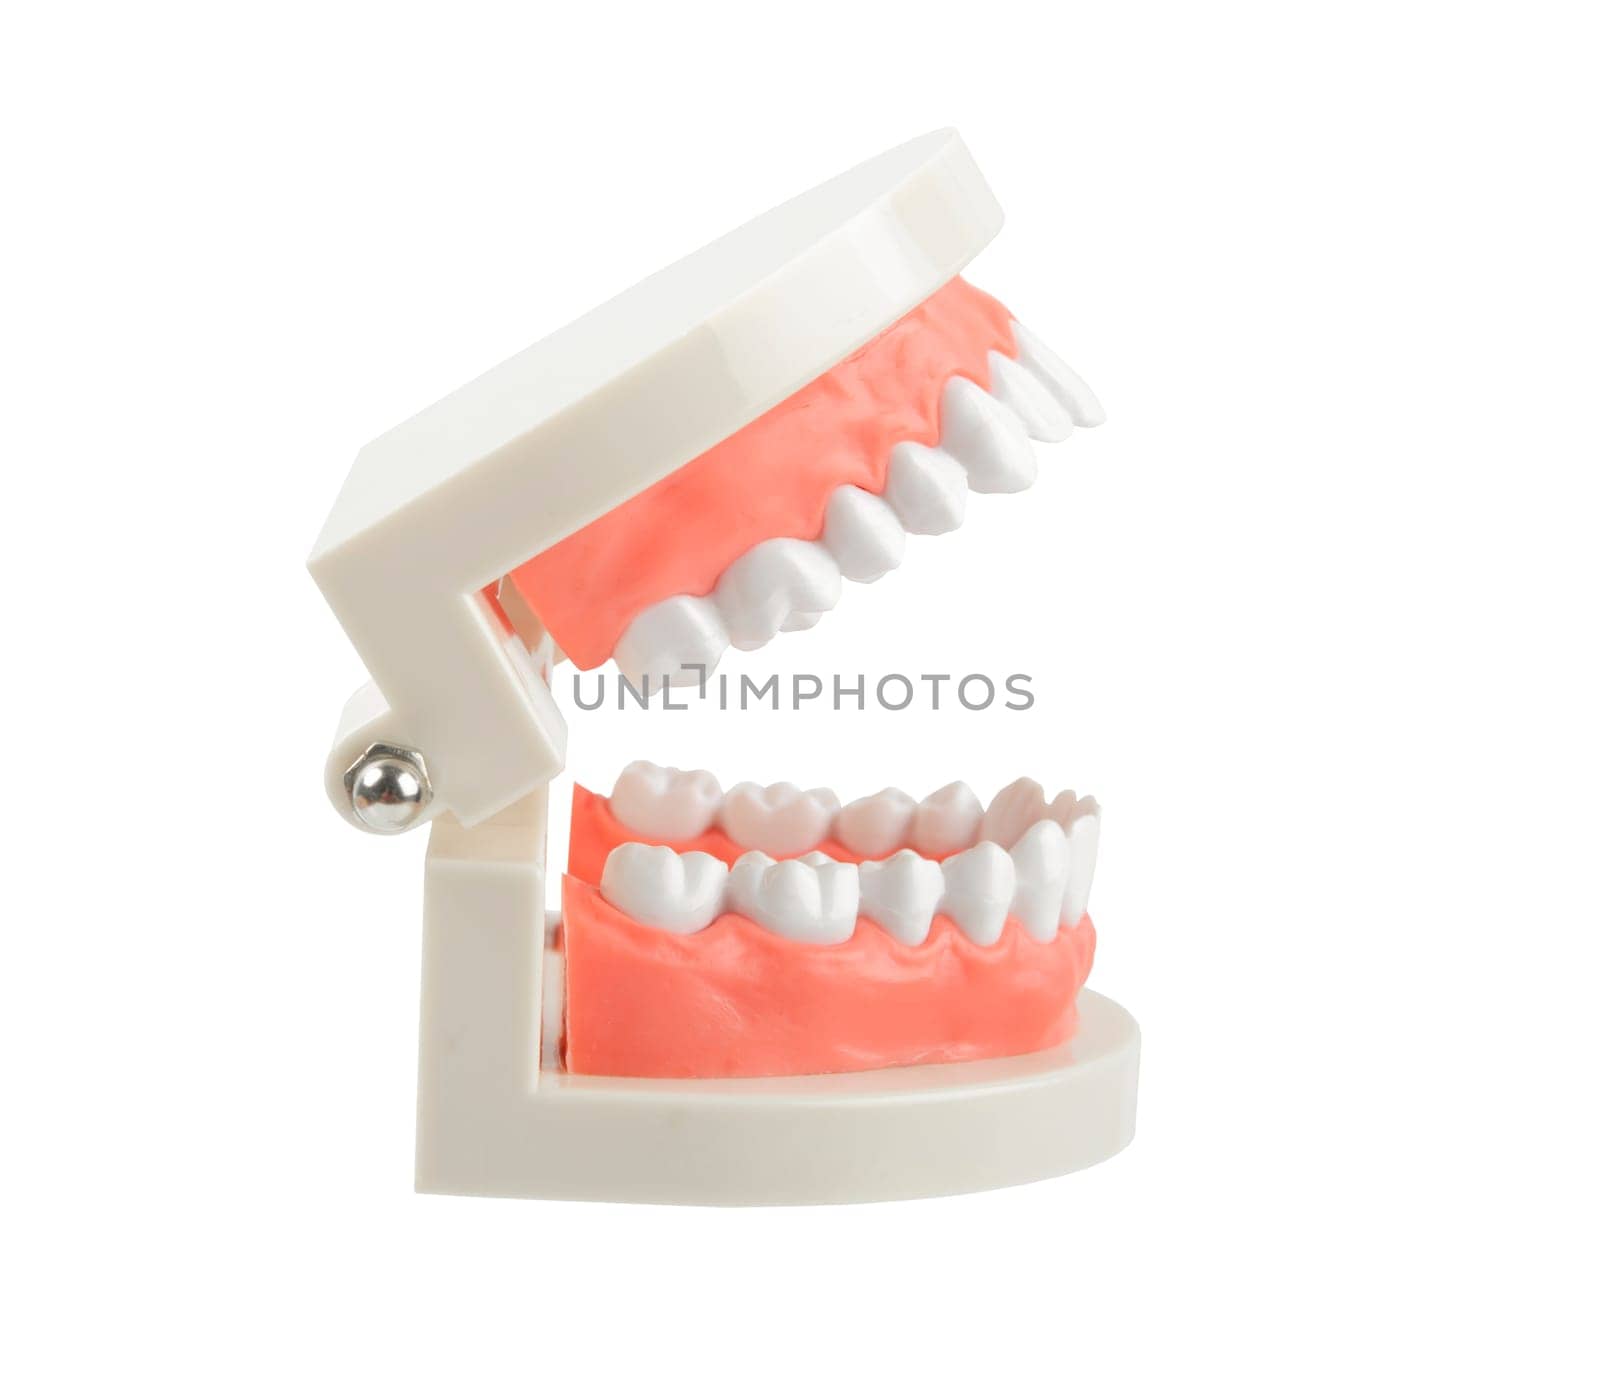 Teeth model with red gum on white background, Save clipping path. Oral cavity care concept